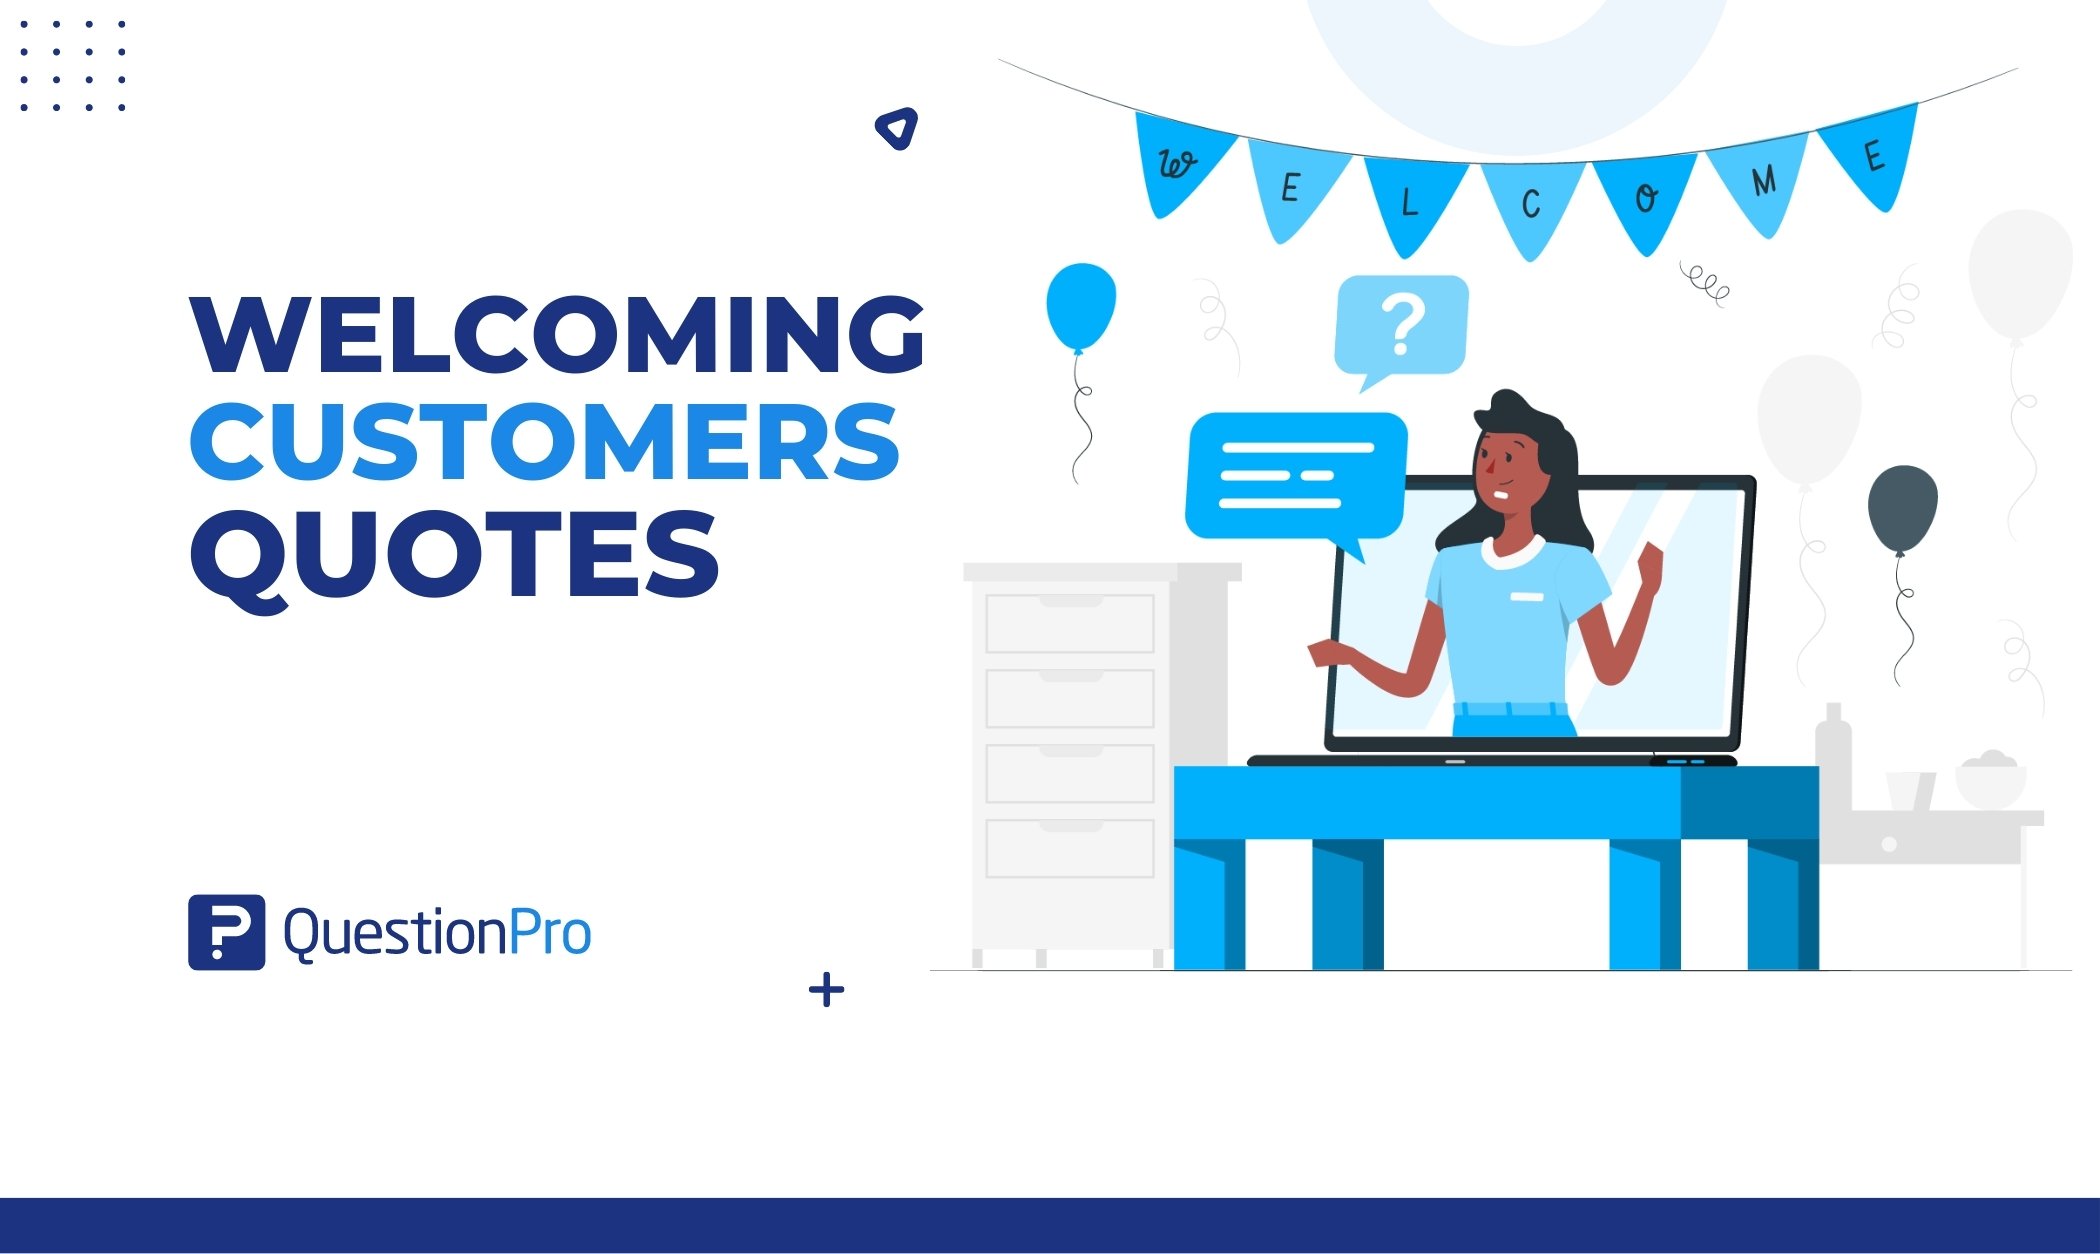 Find the right words to welcome your customers. Check out our 10 welcoming customers quotes that can help you serve customers effectively.